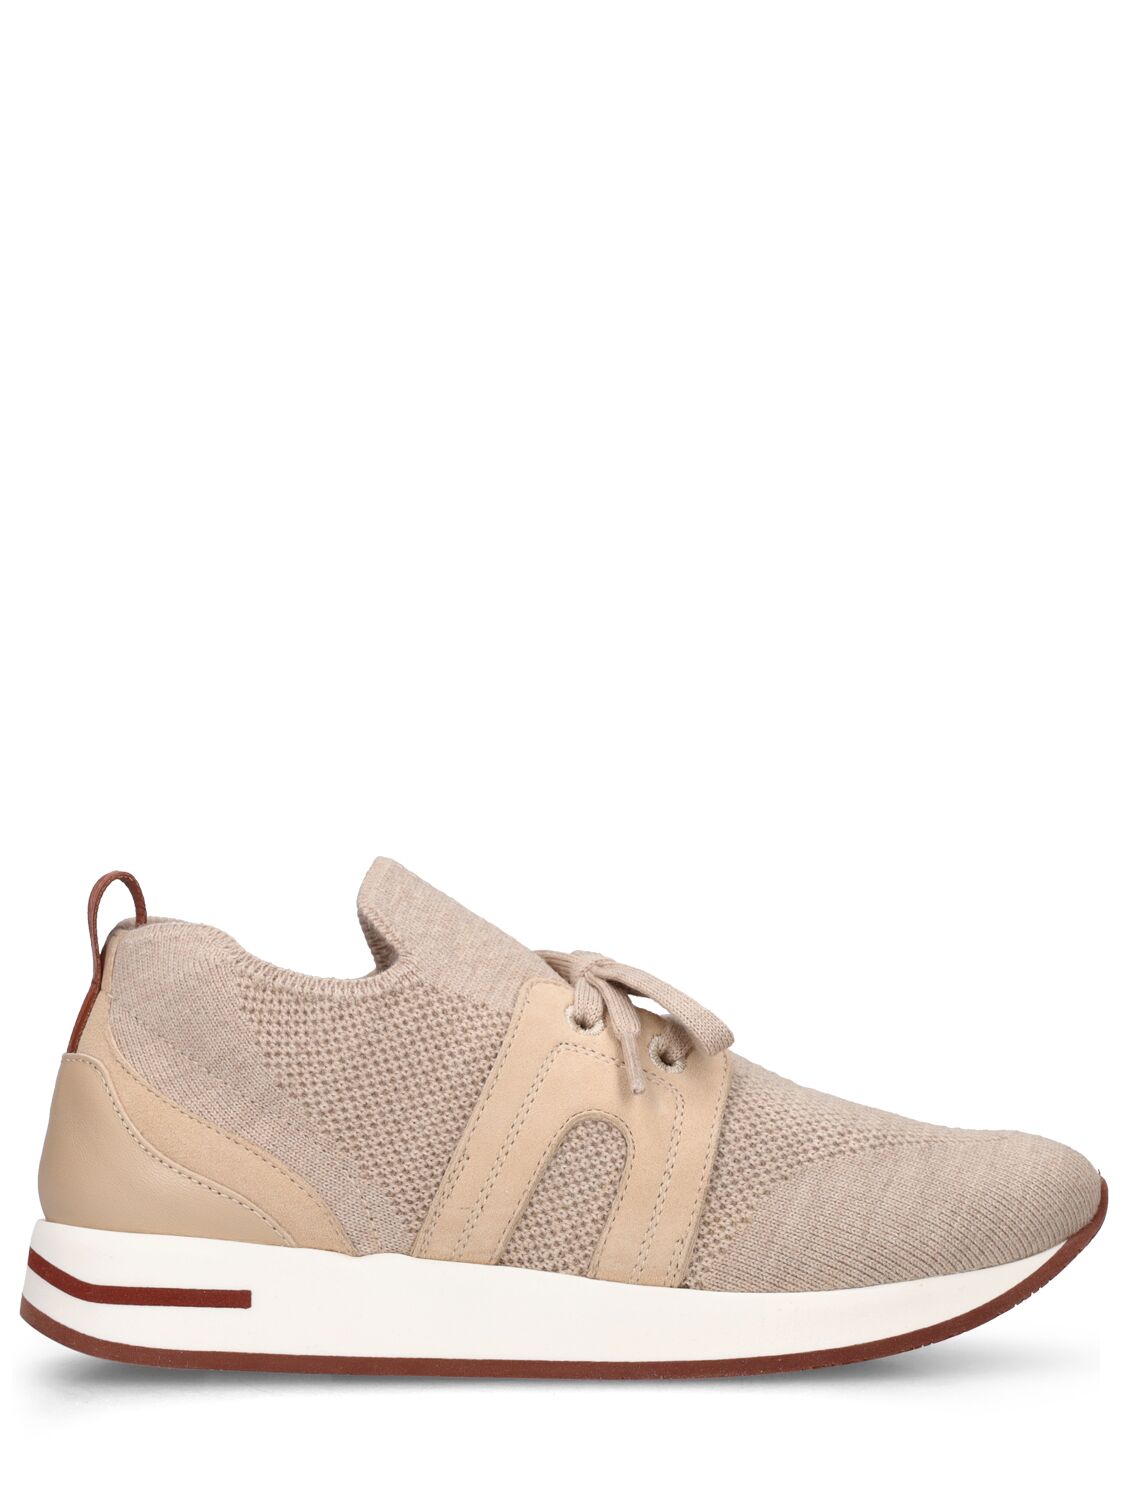 Loro Piana Kids' Leather Lace-up Trainers In Beige